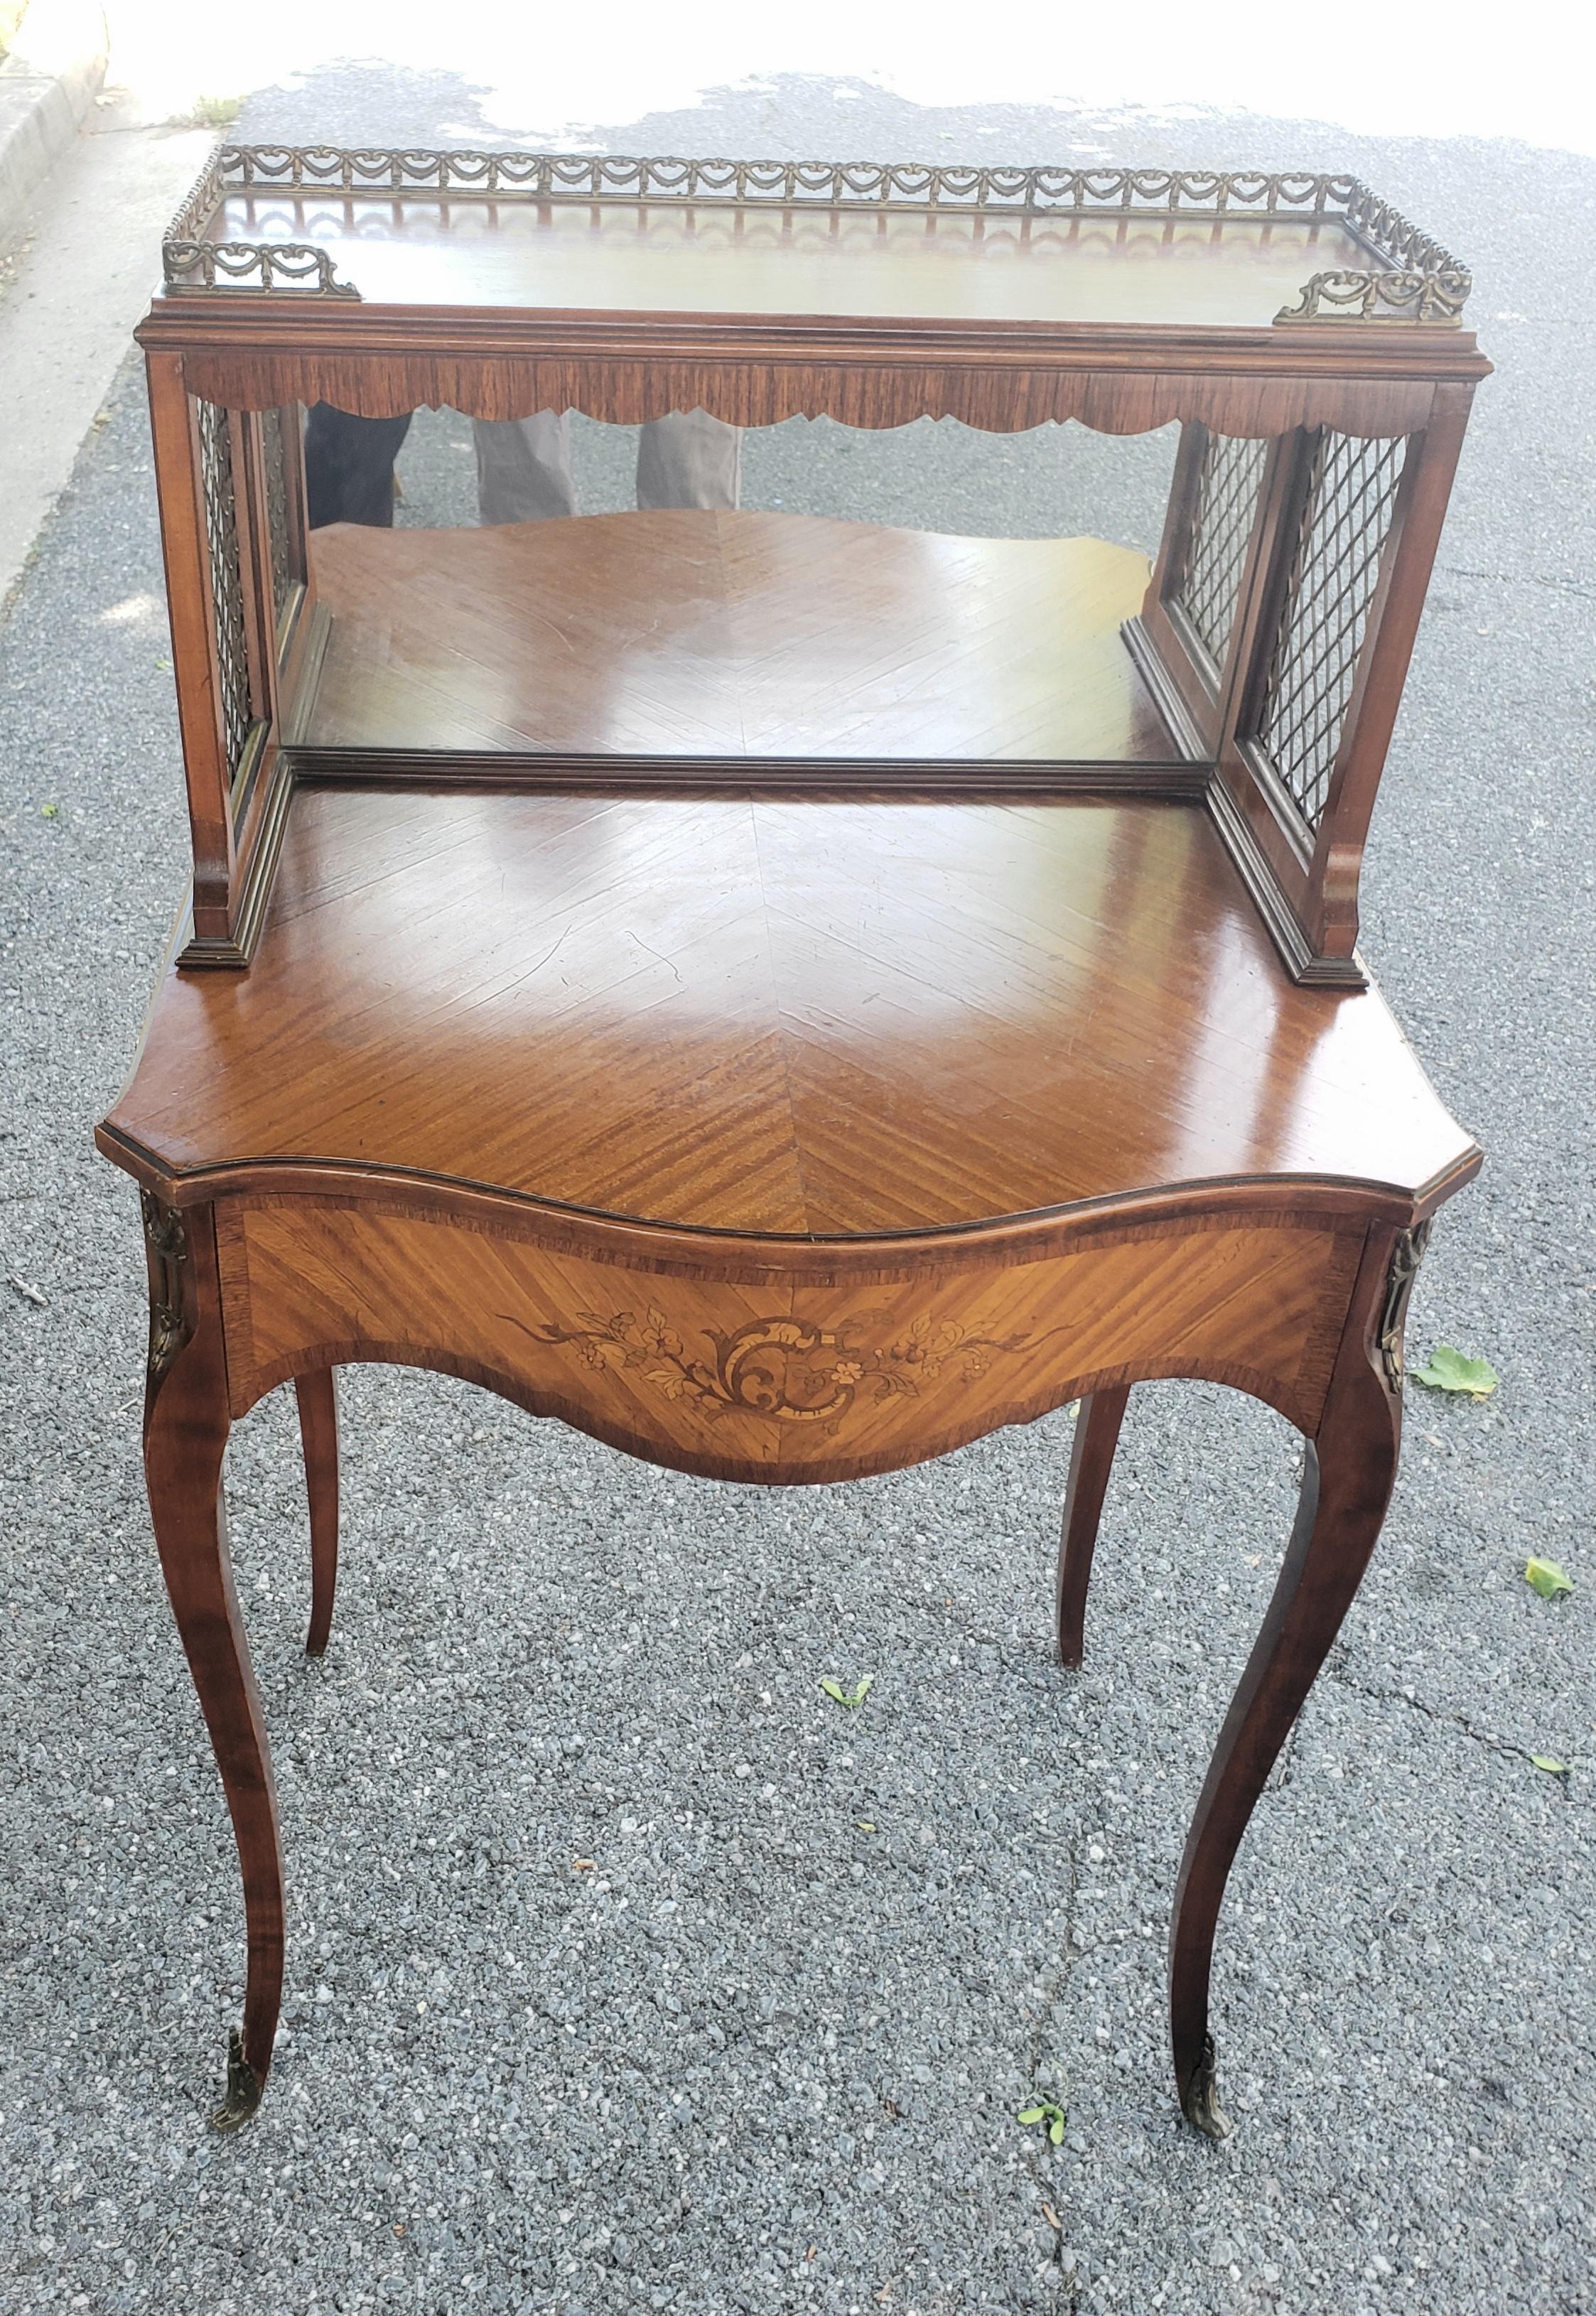 Louis XV Marquetry Mirrored and Galleried Bonheur Du Jour Ladies' Bureau Vanity In Good Condition For Sale In Germantown, MD